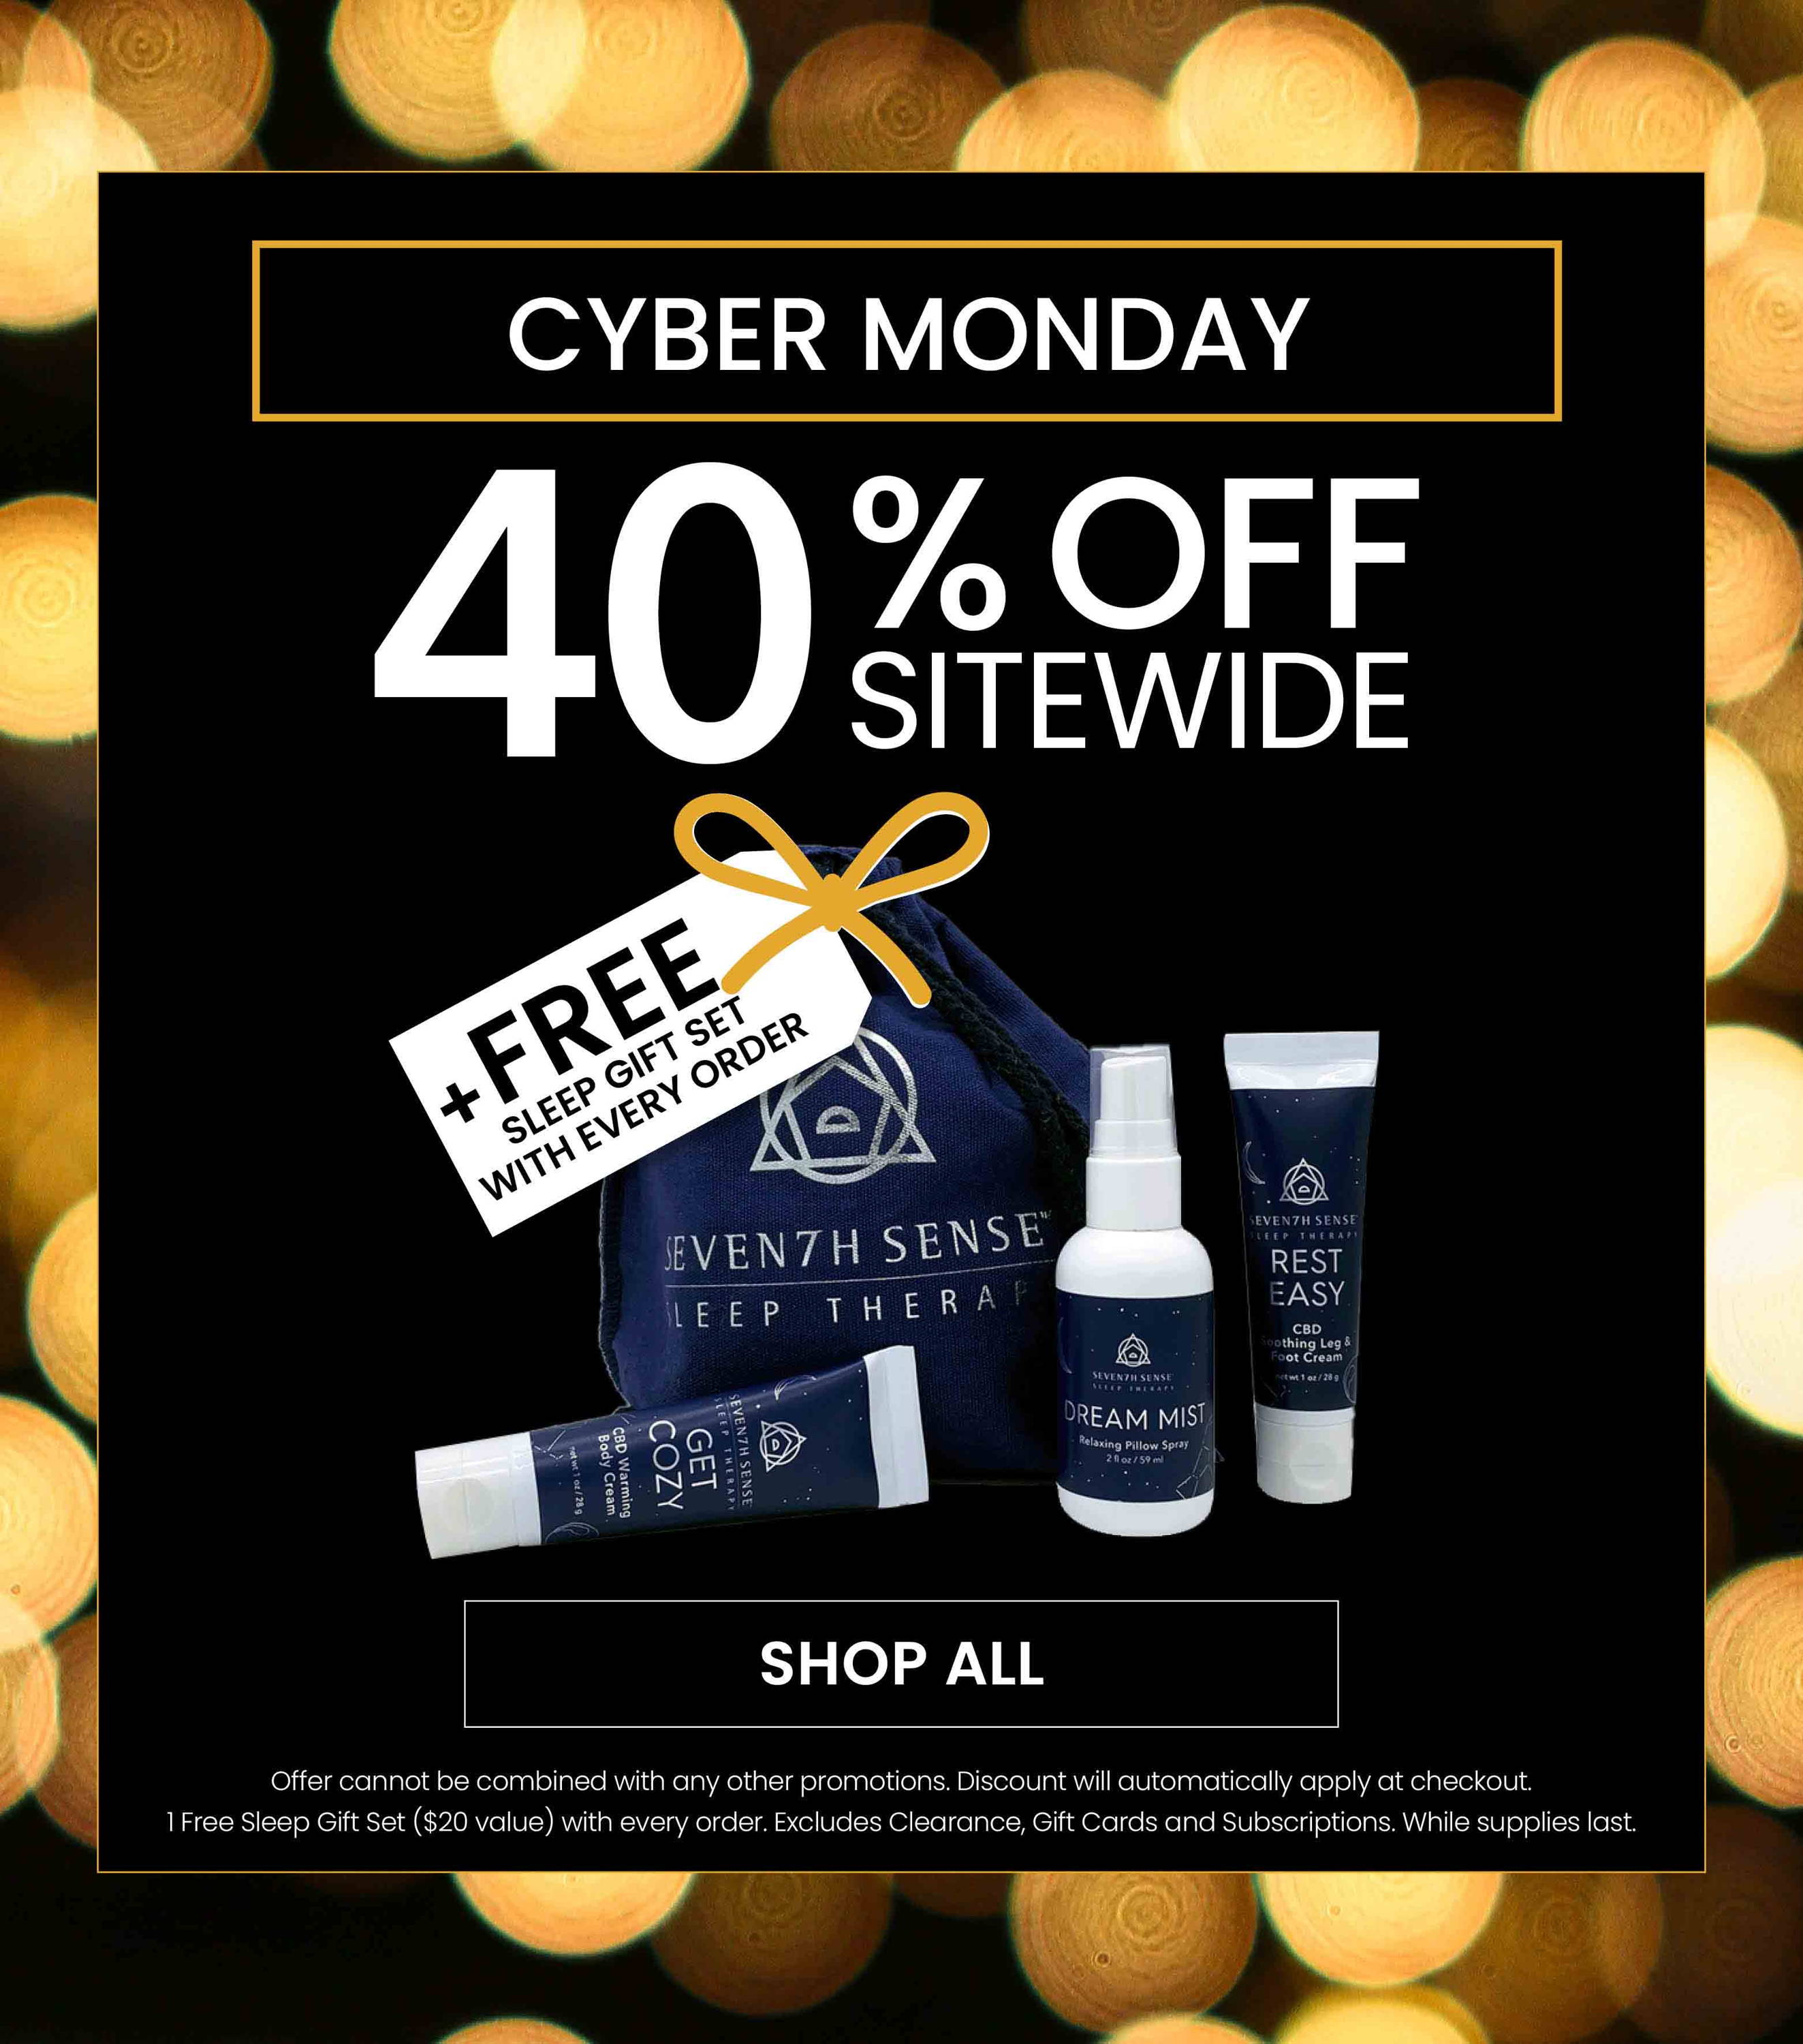 Cyber Monday. 40% Off Sitewide. Plus, Free Sleep Gift Set with EVERY Order.